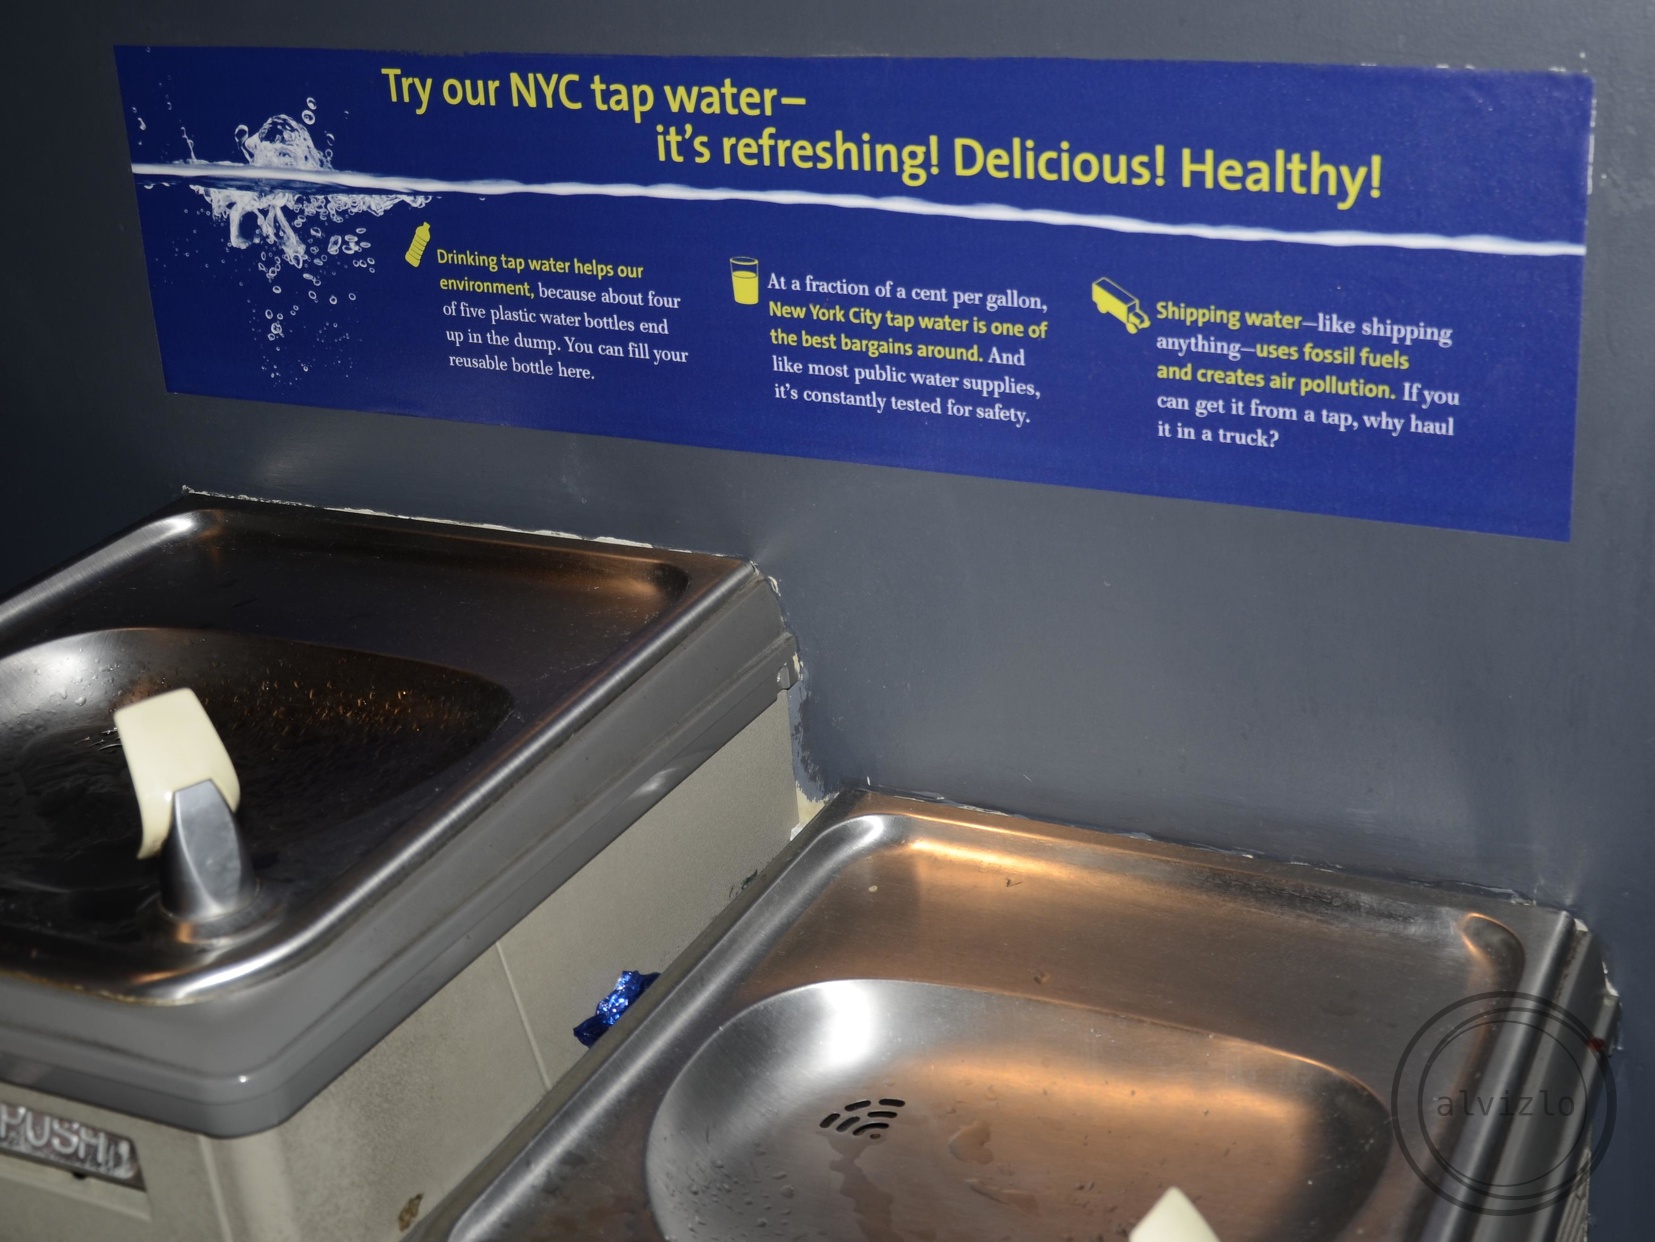 NYC tap water